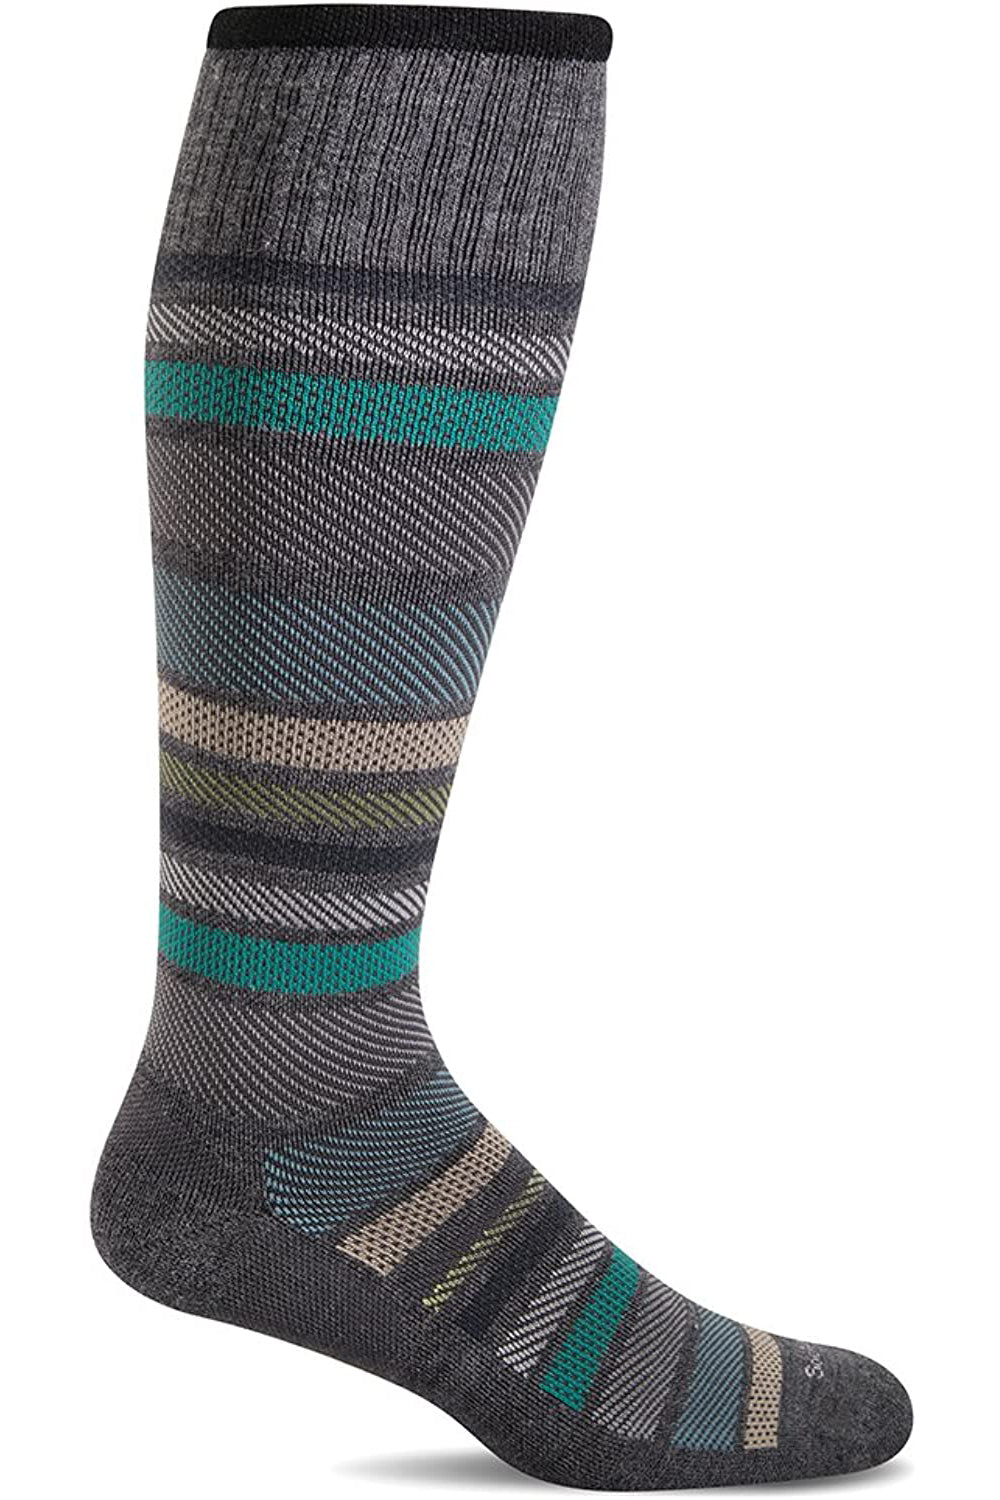 Sockwell Men's Twillful Compression Sock in Charcoal color from the side